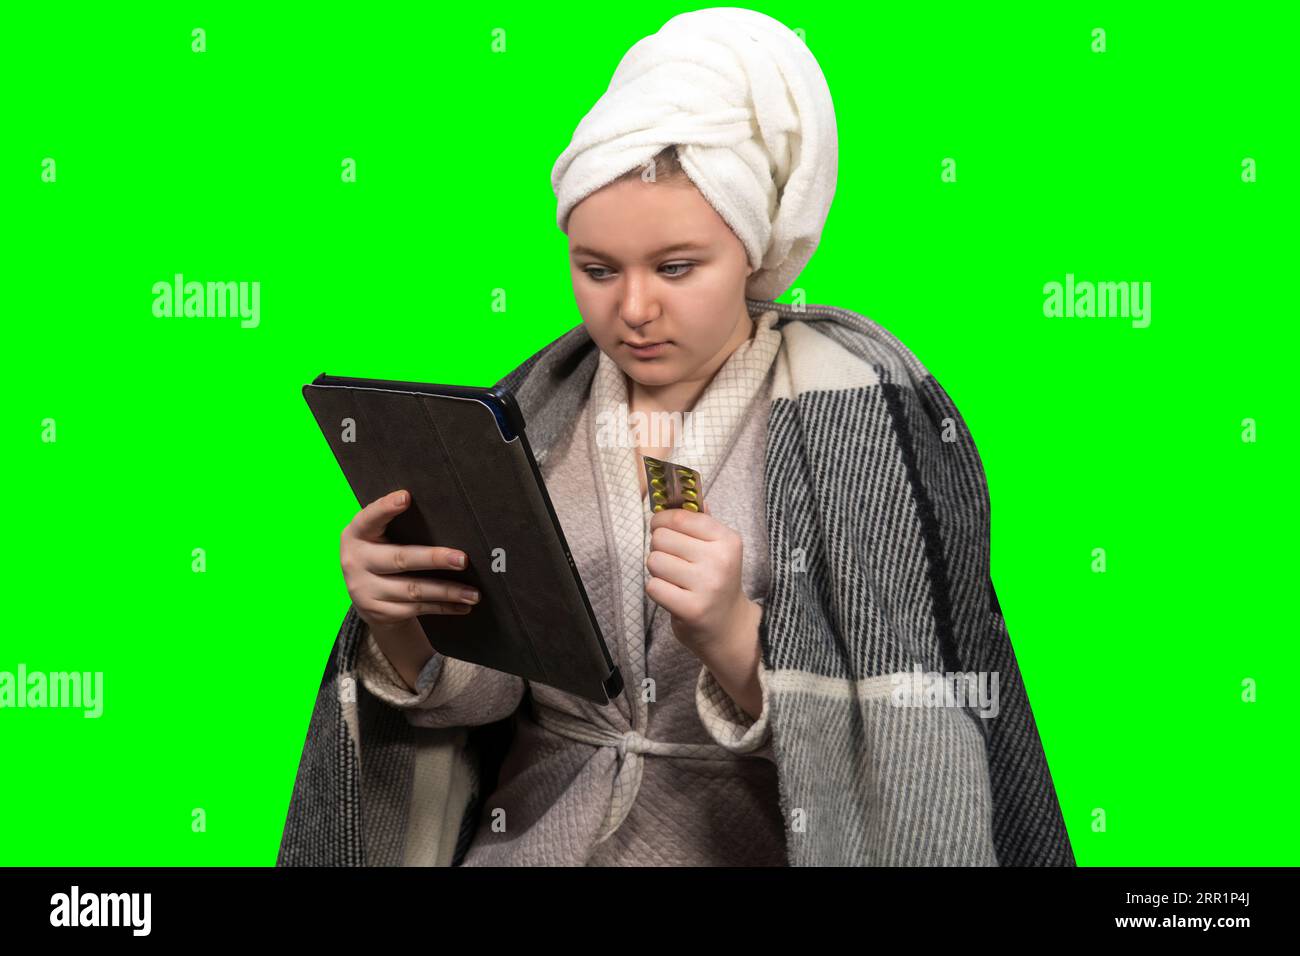 Girl with symptoms of cold holds a blister of pills in one hand and a tablet PC on a green background (chroma key) in other. Online consultation Stock Photo